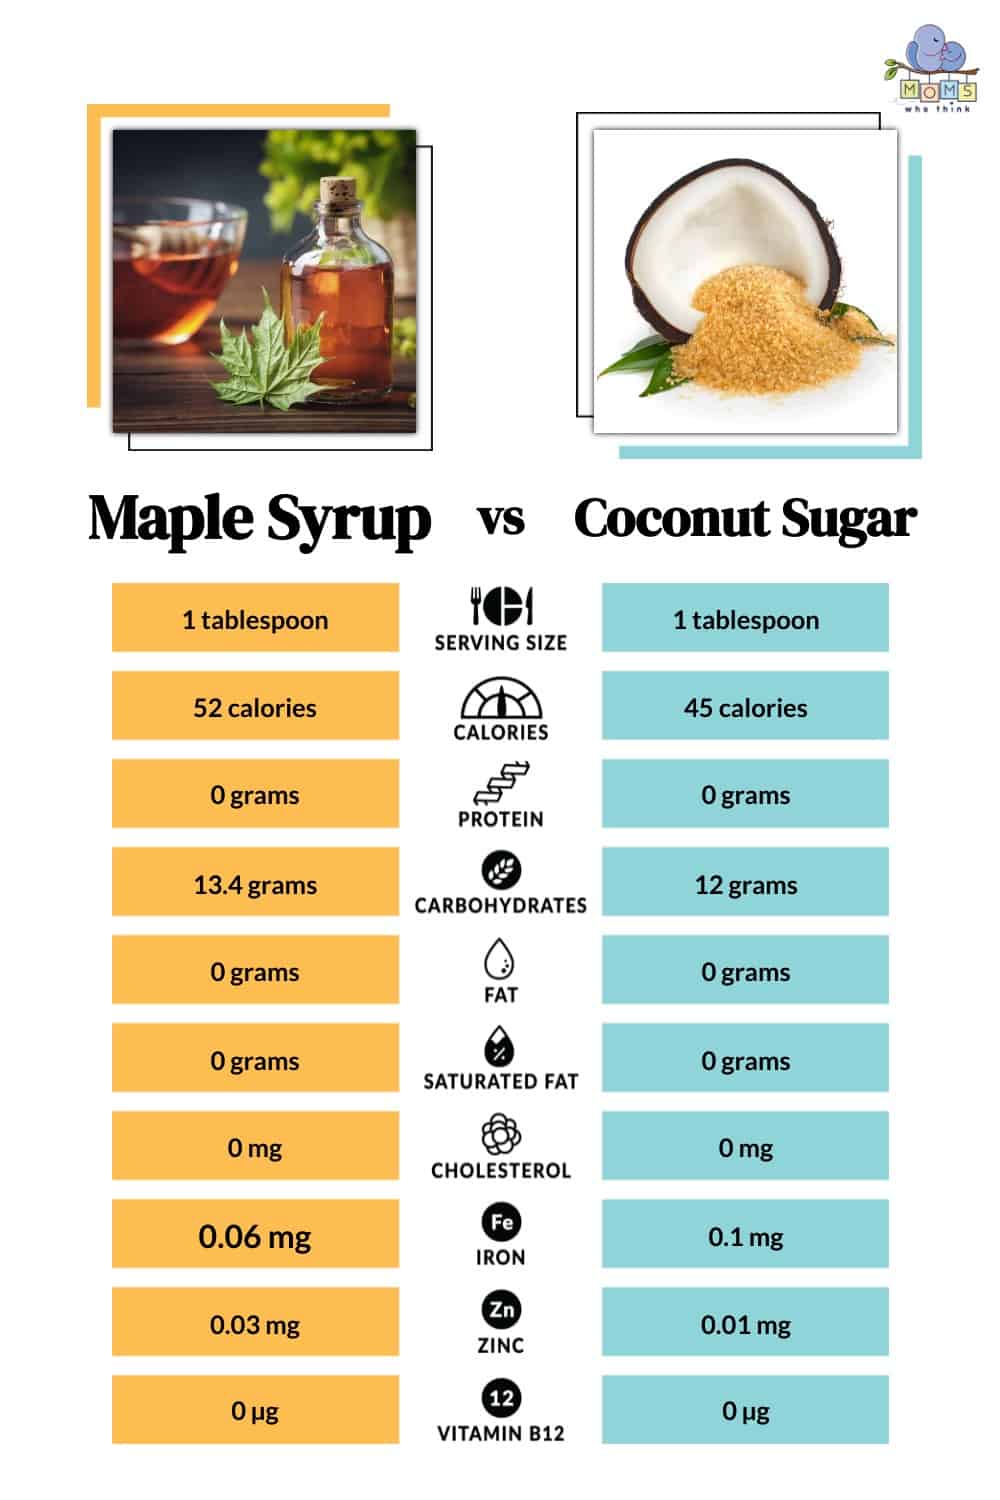 Maple Syrup vs Coconut Sugar Nutritional Facts